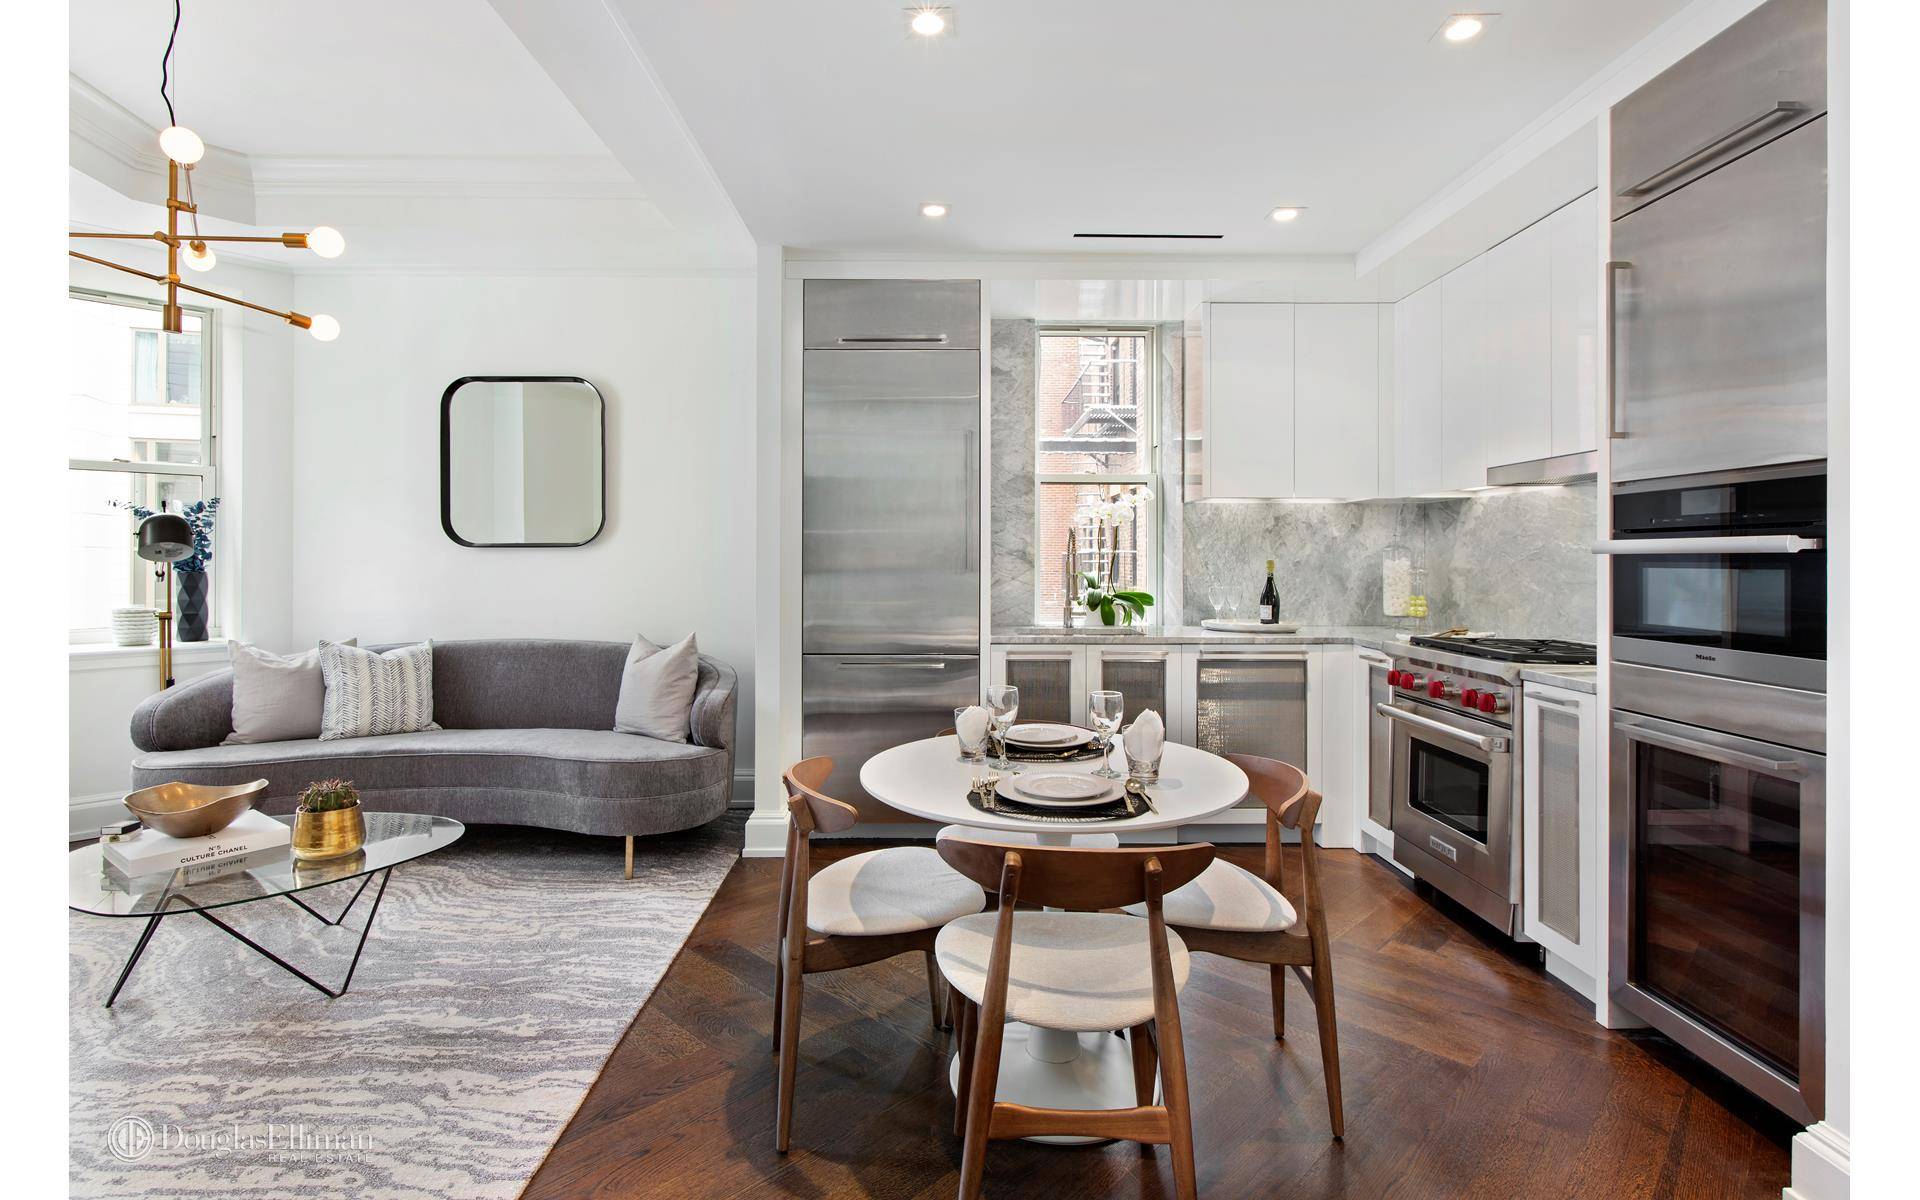 Virtual and In Person Appointments Now AvailableThis split two bedroom, two bathroom residence is situated in the amenity filled Chatsworth, a newly renovated and upgraded Prewar gem in Manhattan's coveted ...